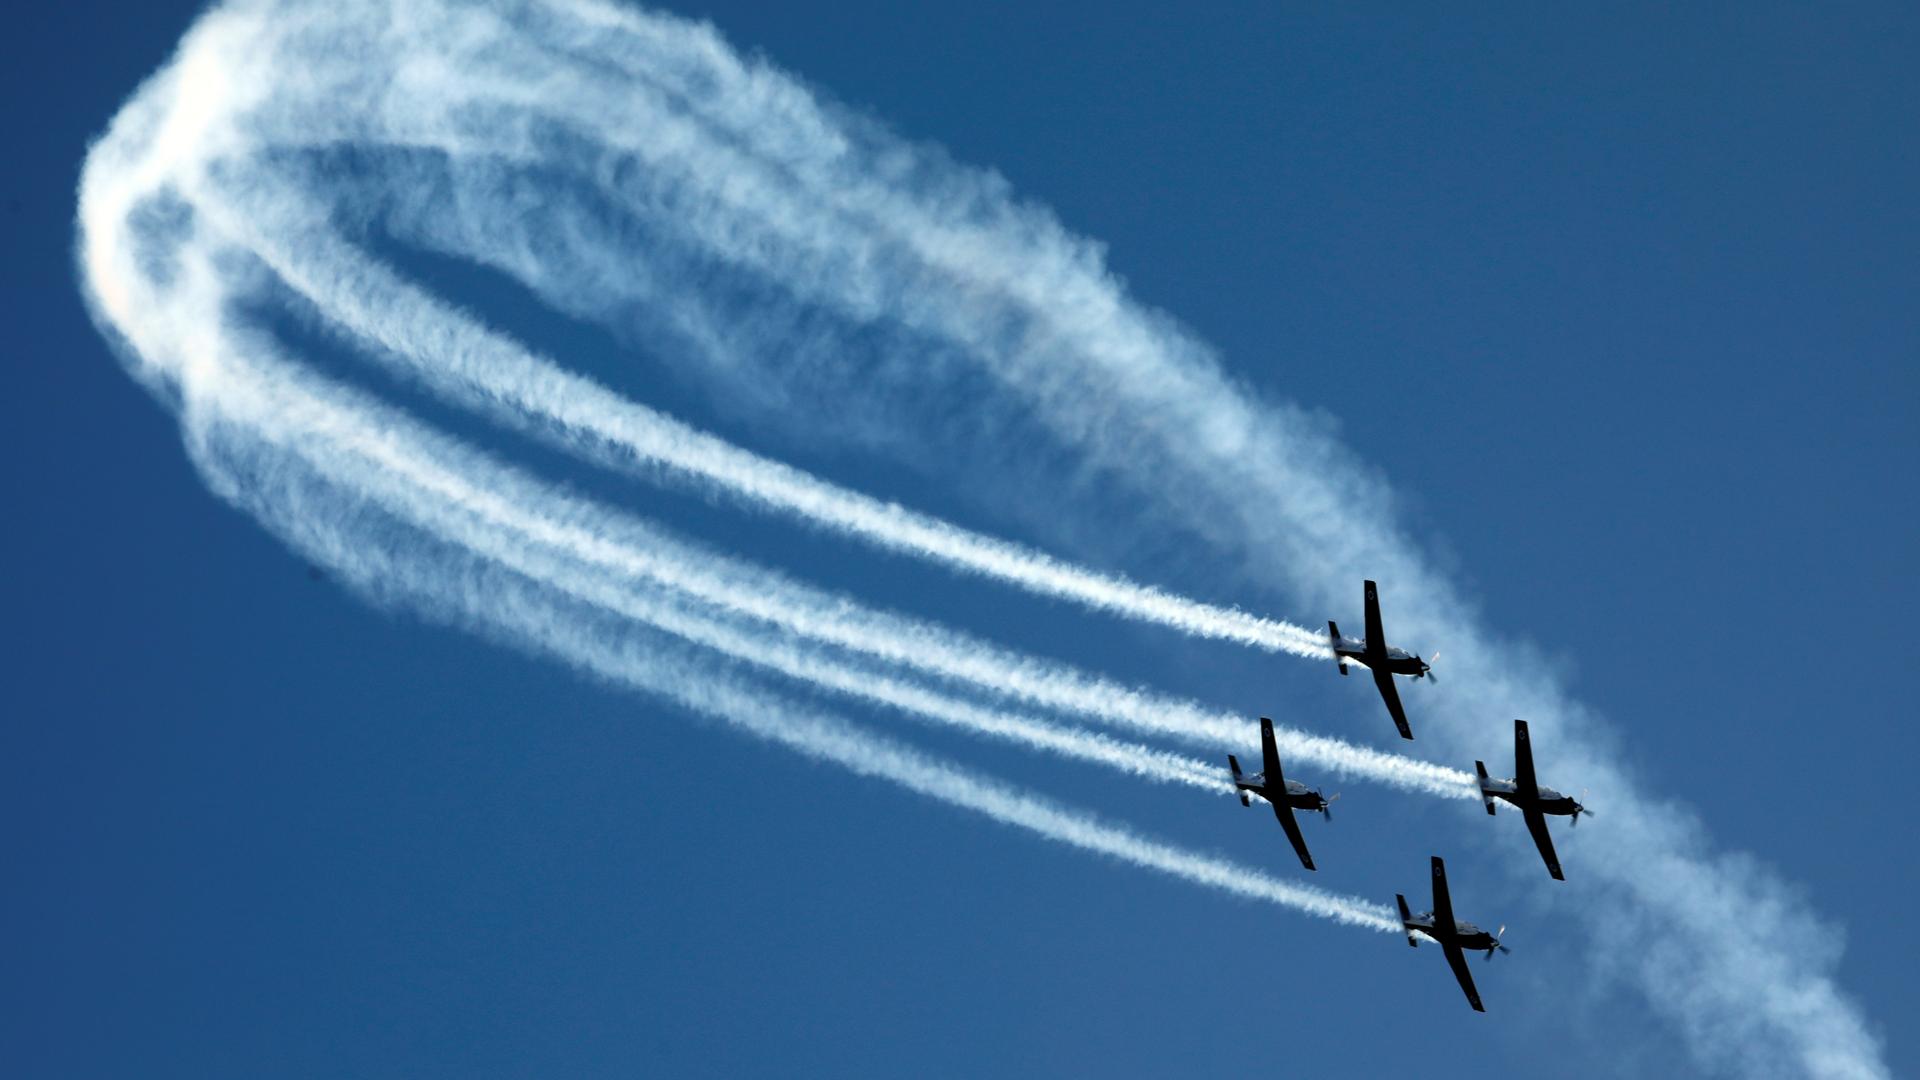 Israeli Air Force T-6 Texan II planes fly in formation during an aerial demonstration at a graduation ceremony for Israeli air force pilots at the Hatzerim air base in southern Israel December 26, 2018.